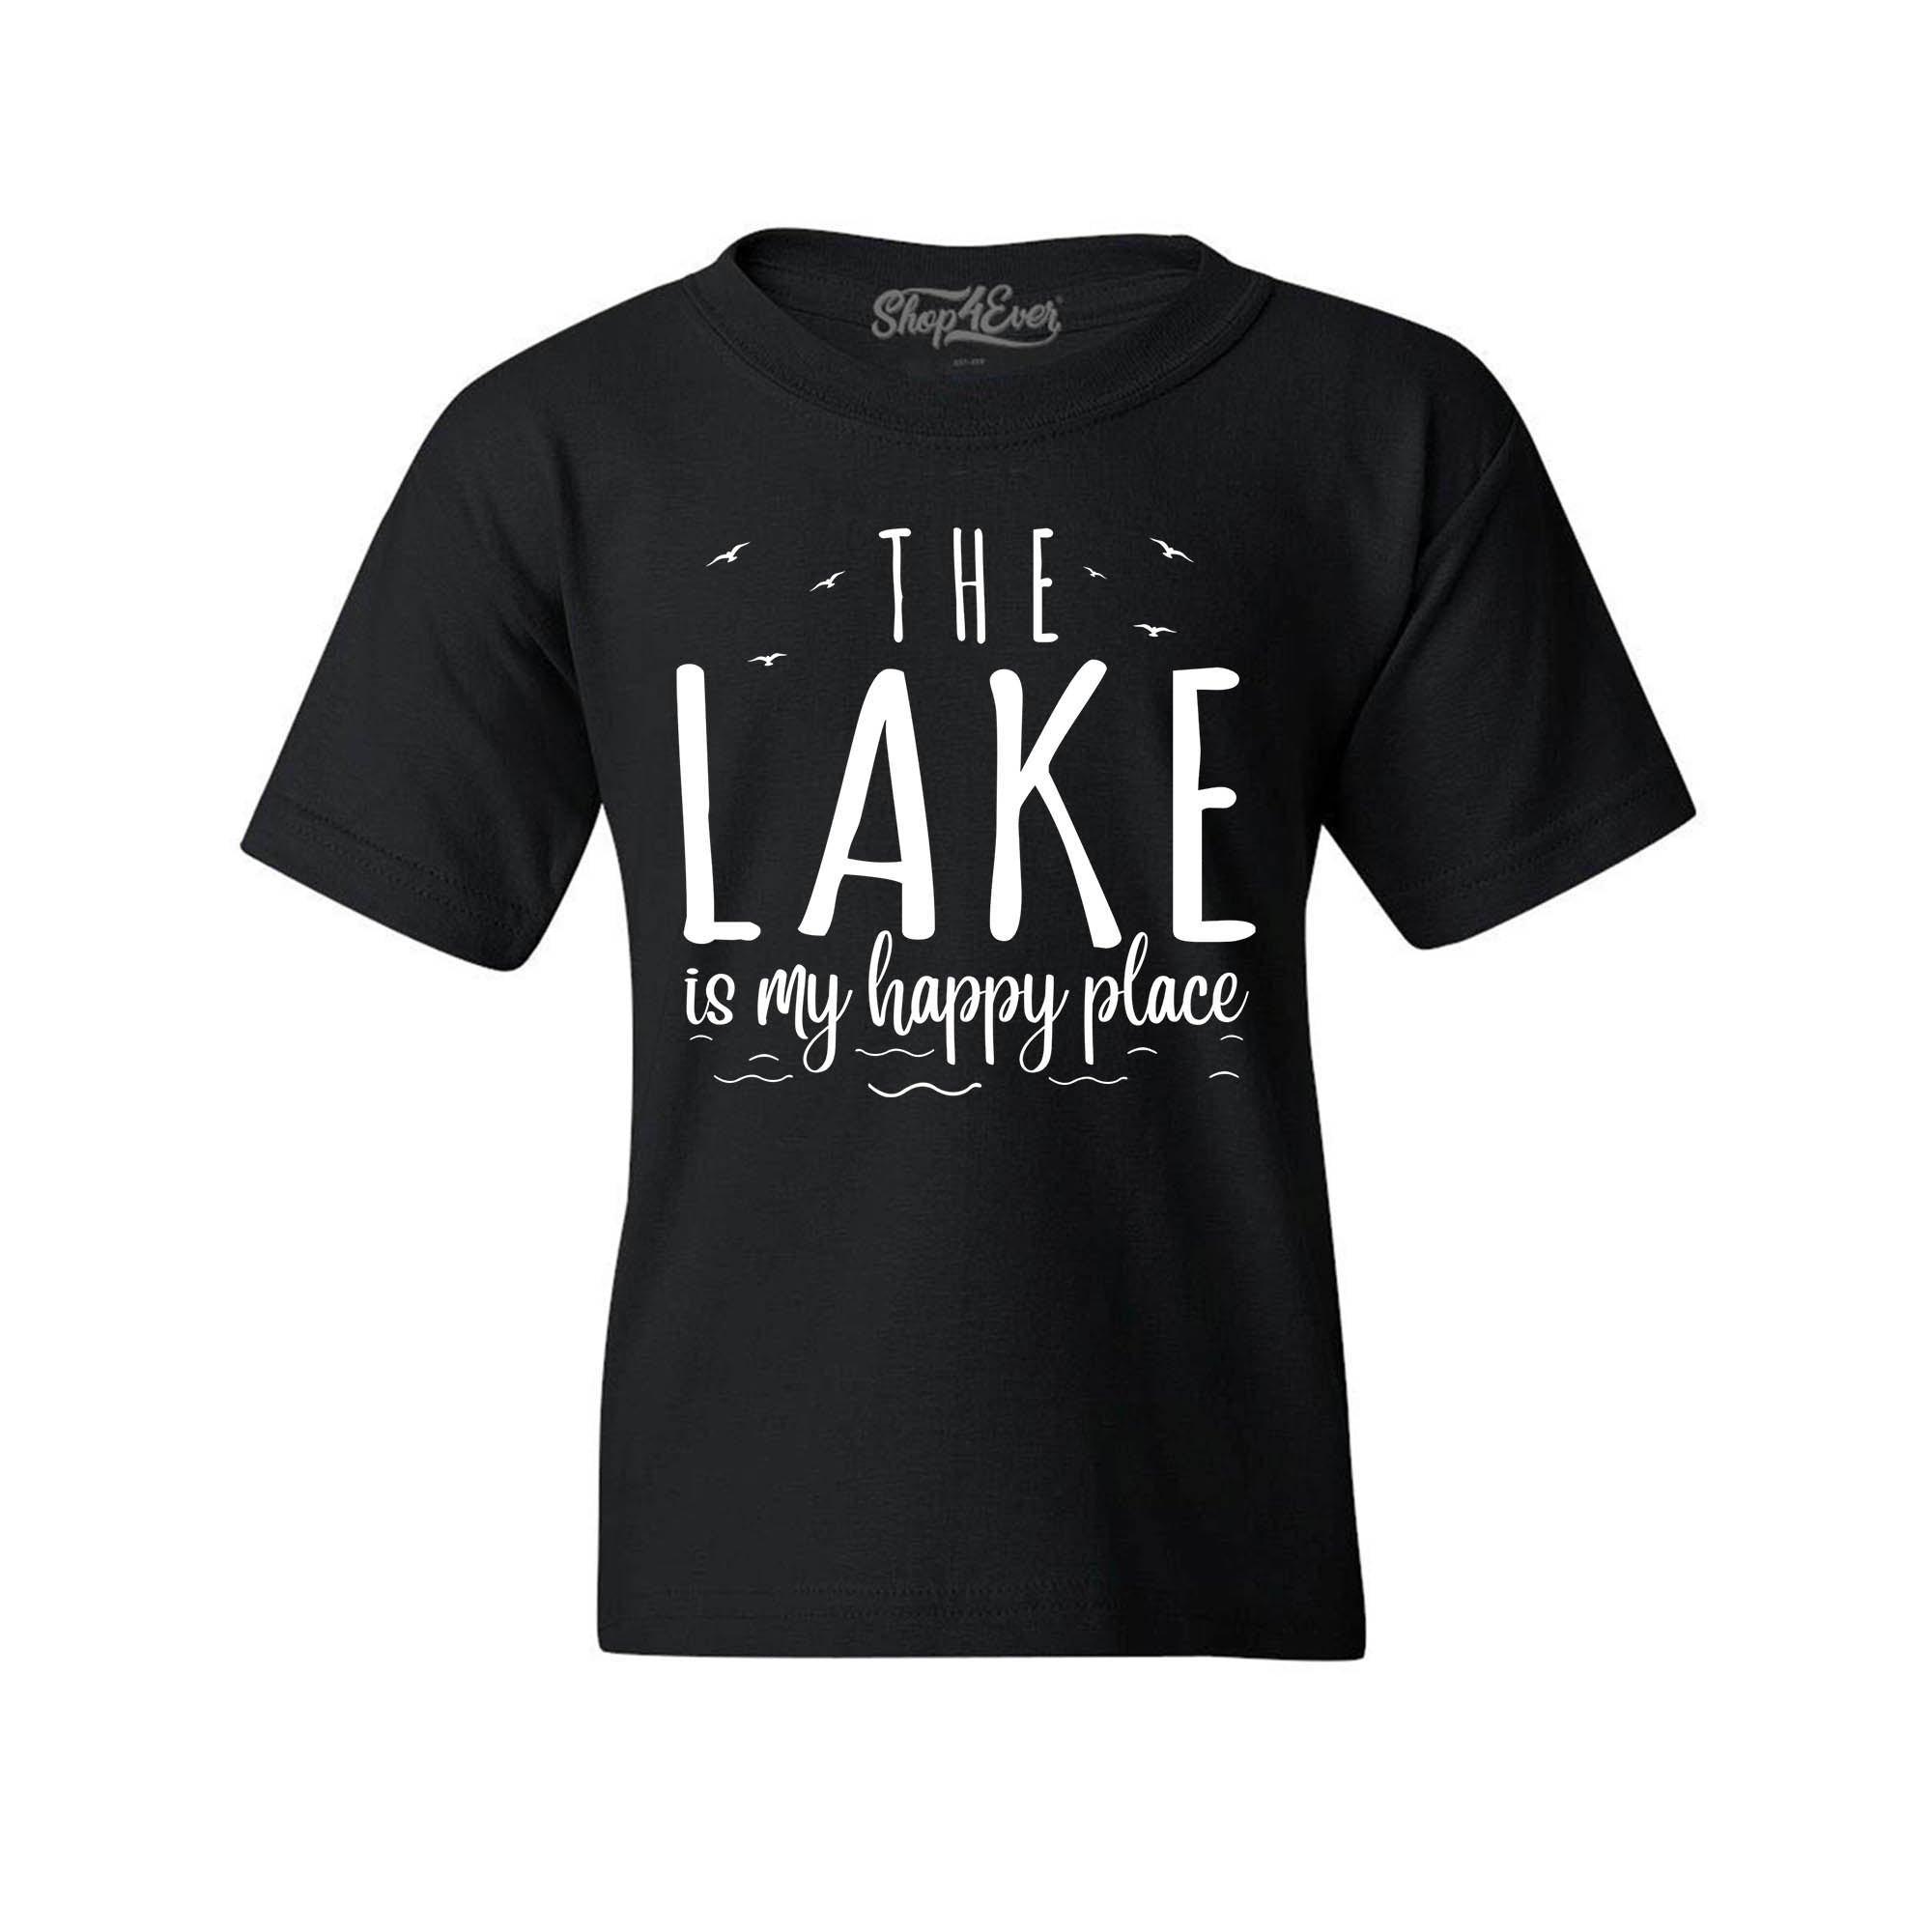 The Lake is My Happy Place Kids Child Tee Summer Youth's T-Shirt